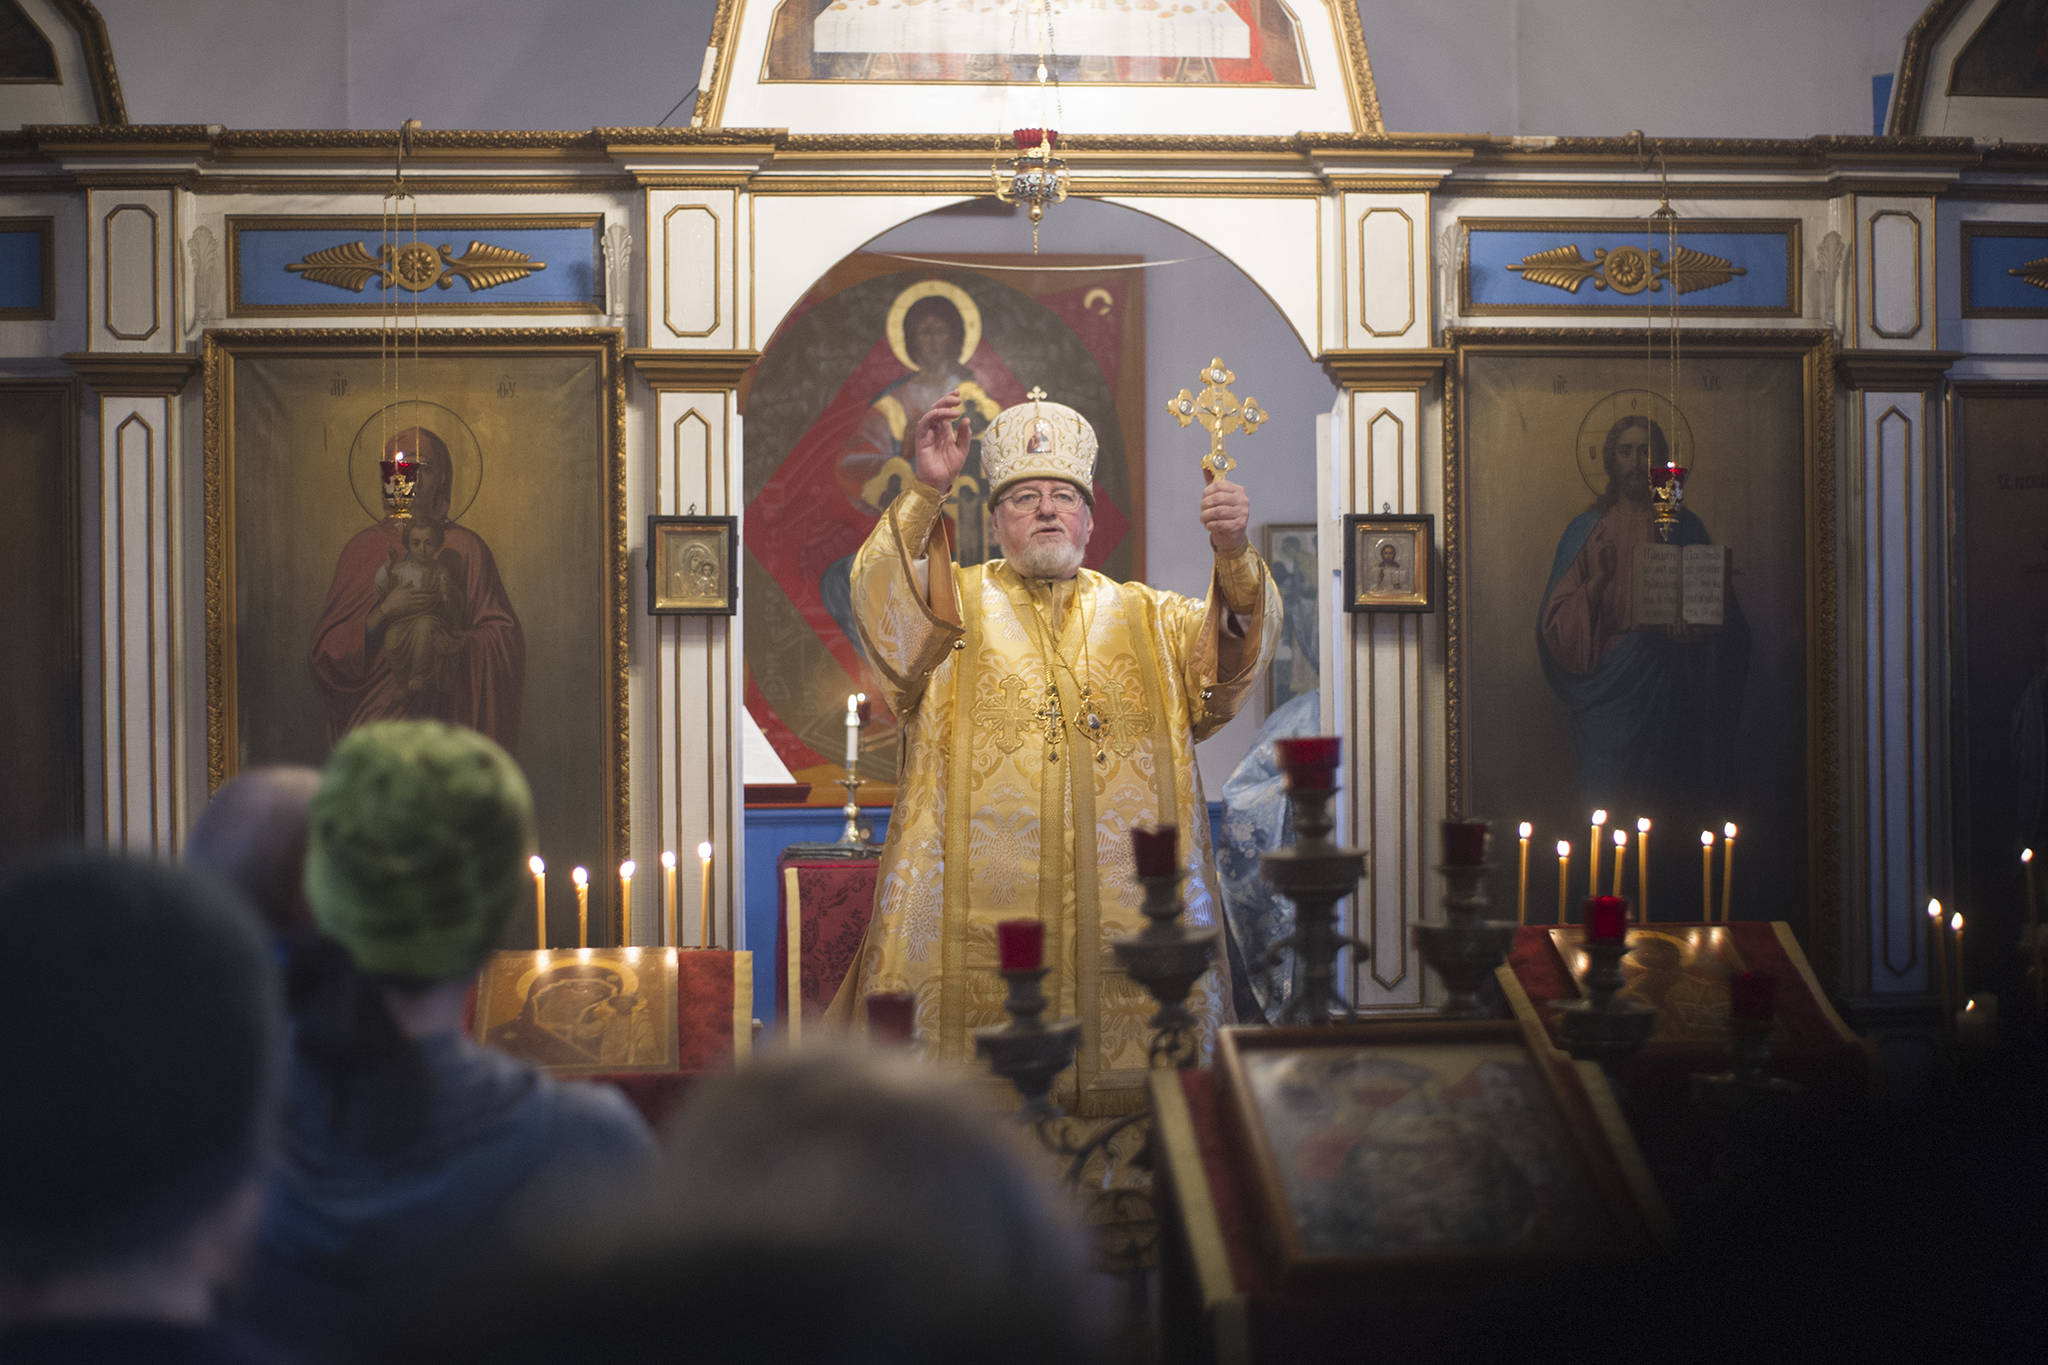 Bishop David of Alaska’s Russian Orthodox Church imparts his blessing during the celebration of the Divine Liturgy at St. Nicholas Russian Orthodox Church on Sunday, Nov. 25, 2018. The bishop was in town … . (Nolin Ainsworth | Juneau Empire)